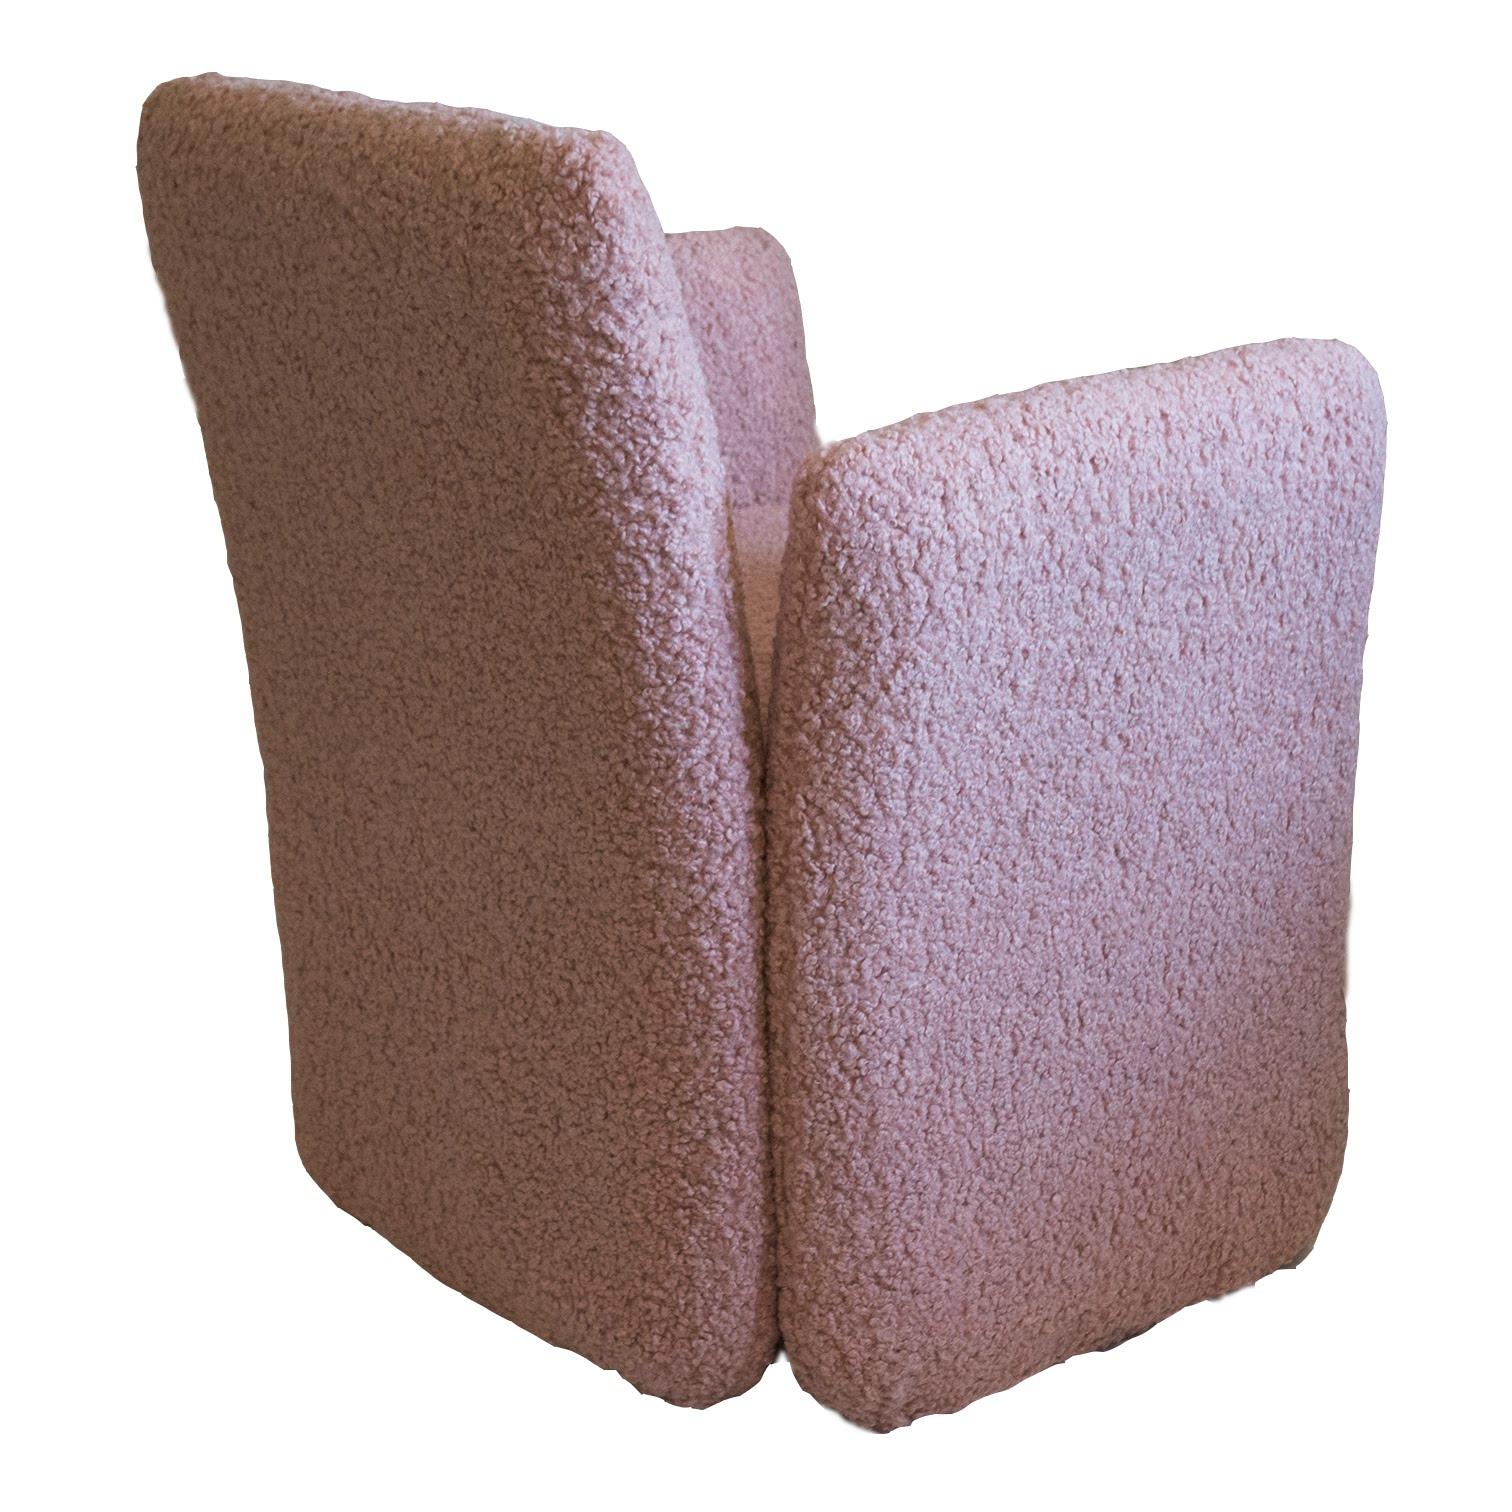 Post-Modern Pair of Chiclet Chairs in Blush Pink Faux Shearling/ Boucle, a pair